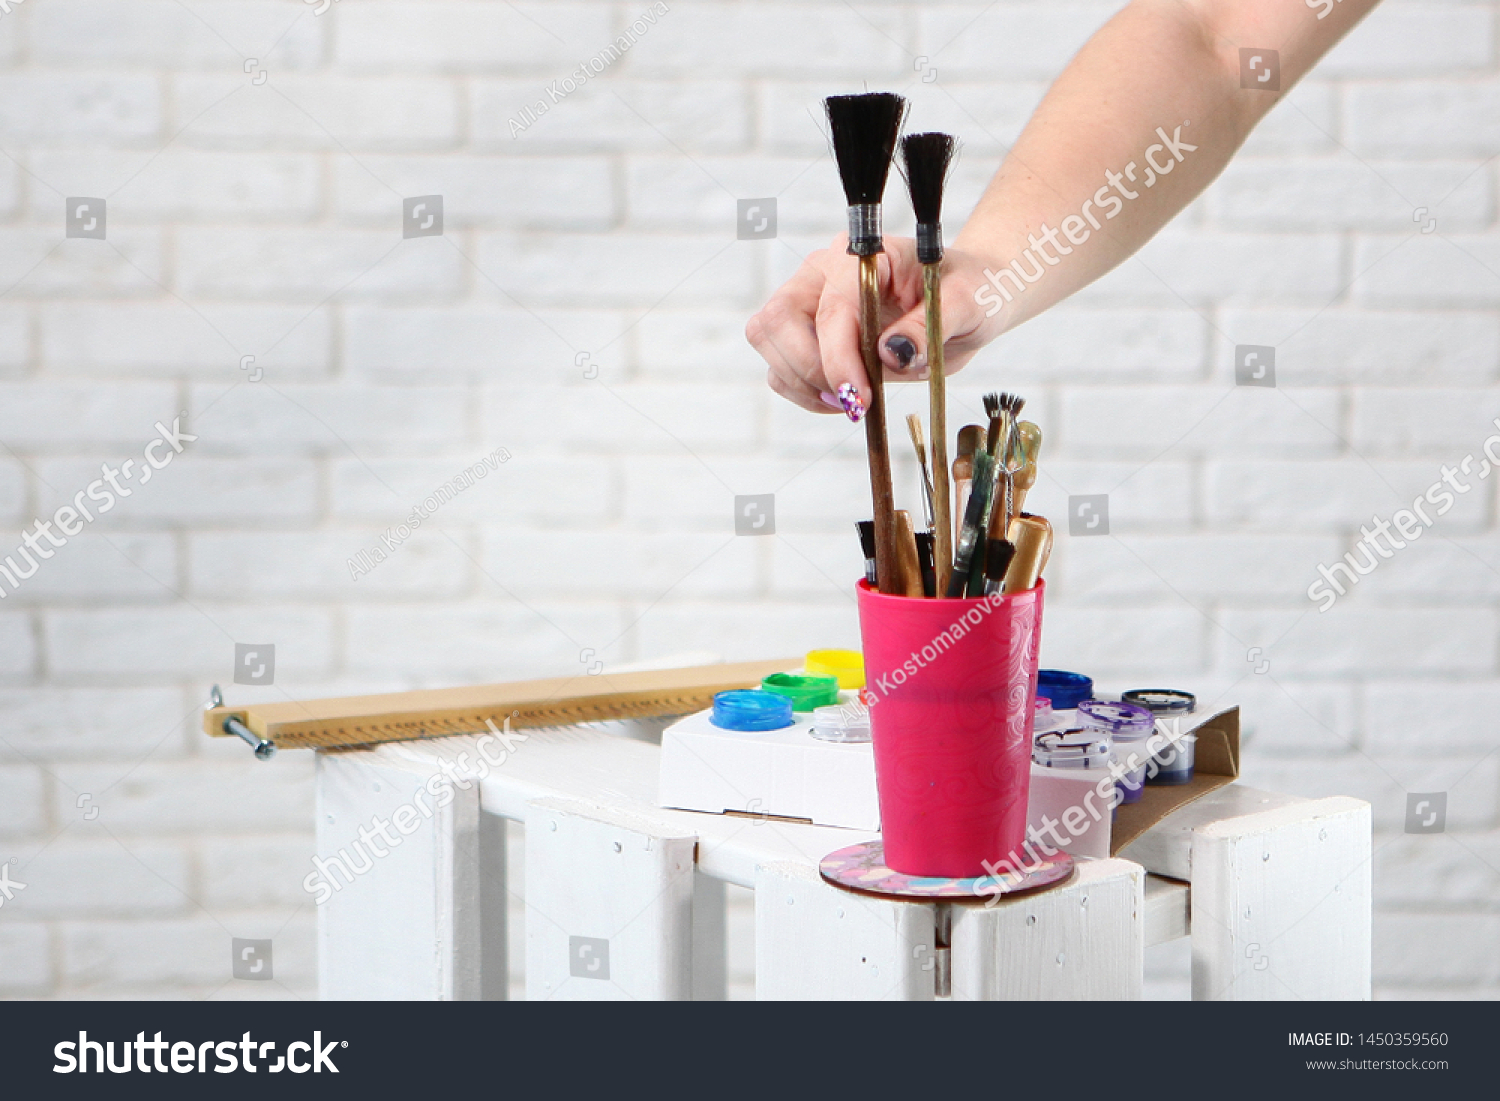 Female hand takes a brush for drawing. Brushes for painting are in the cup. Photo on the background of a white wall with a brickwork effect. Concept hobbies and hobbies. Photos in the interior. #1450359560